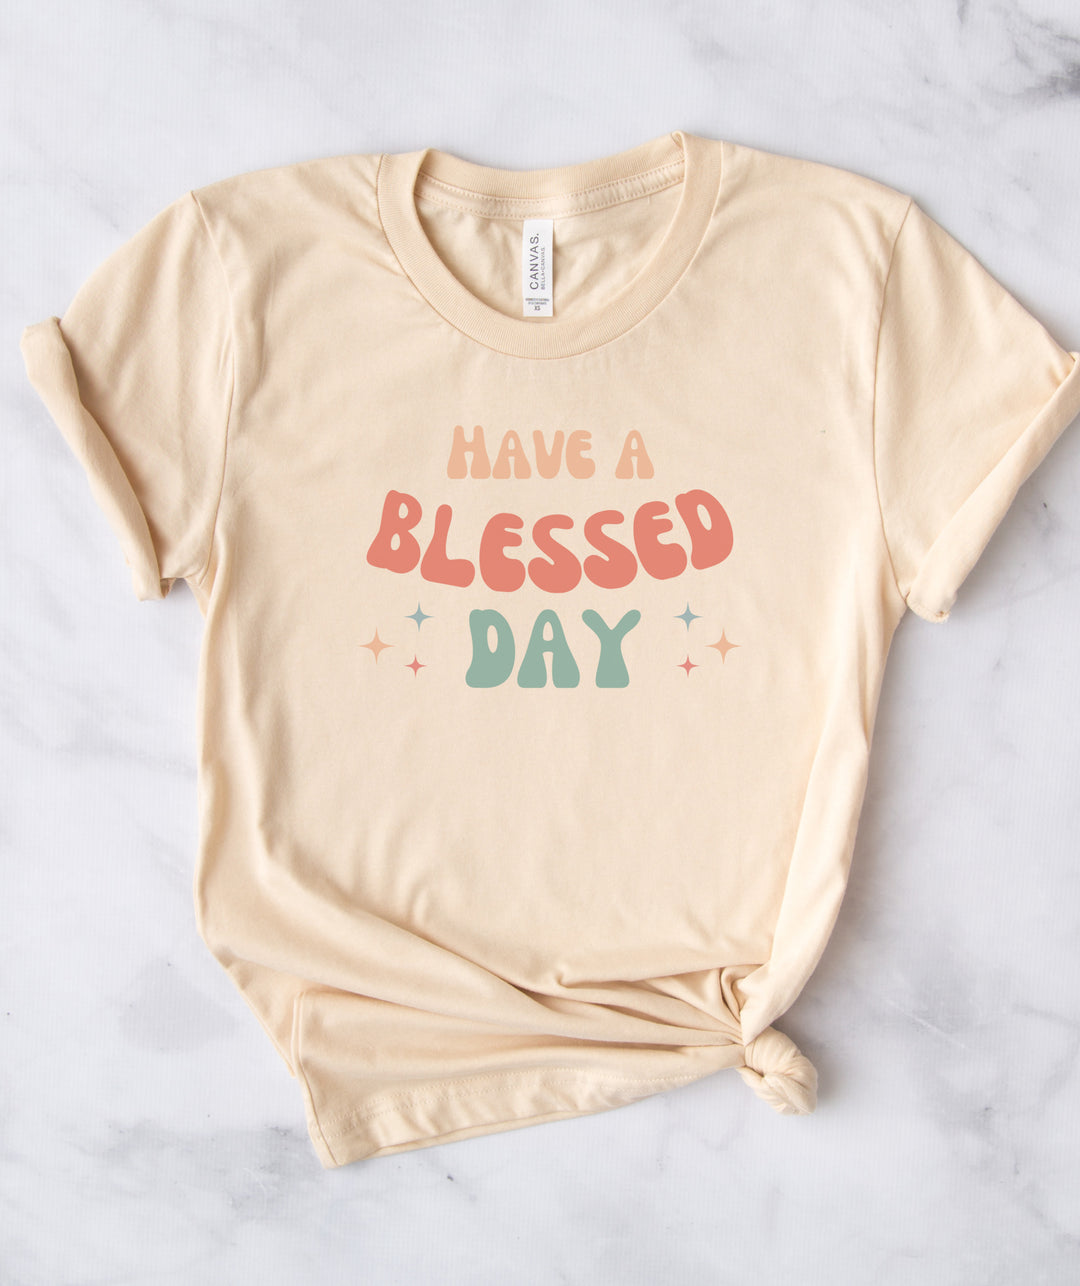 Have A Blessed Day - Unisex Crew-Neck Tee